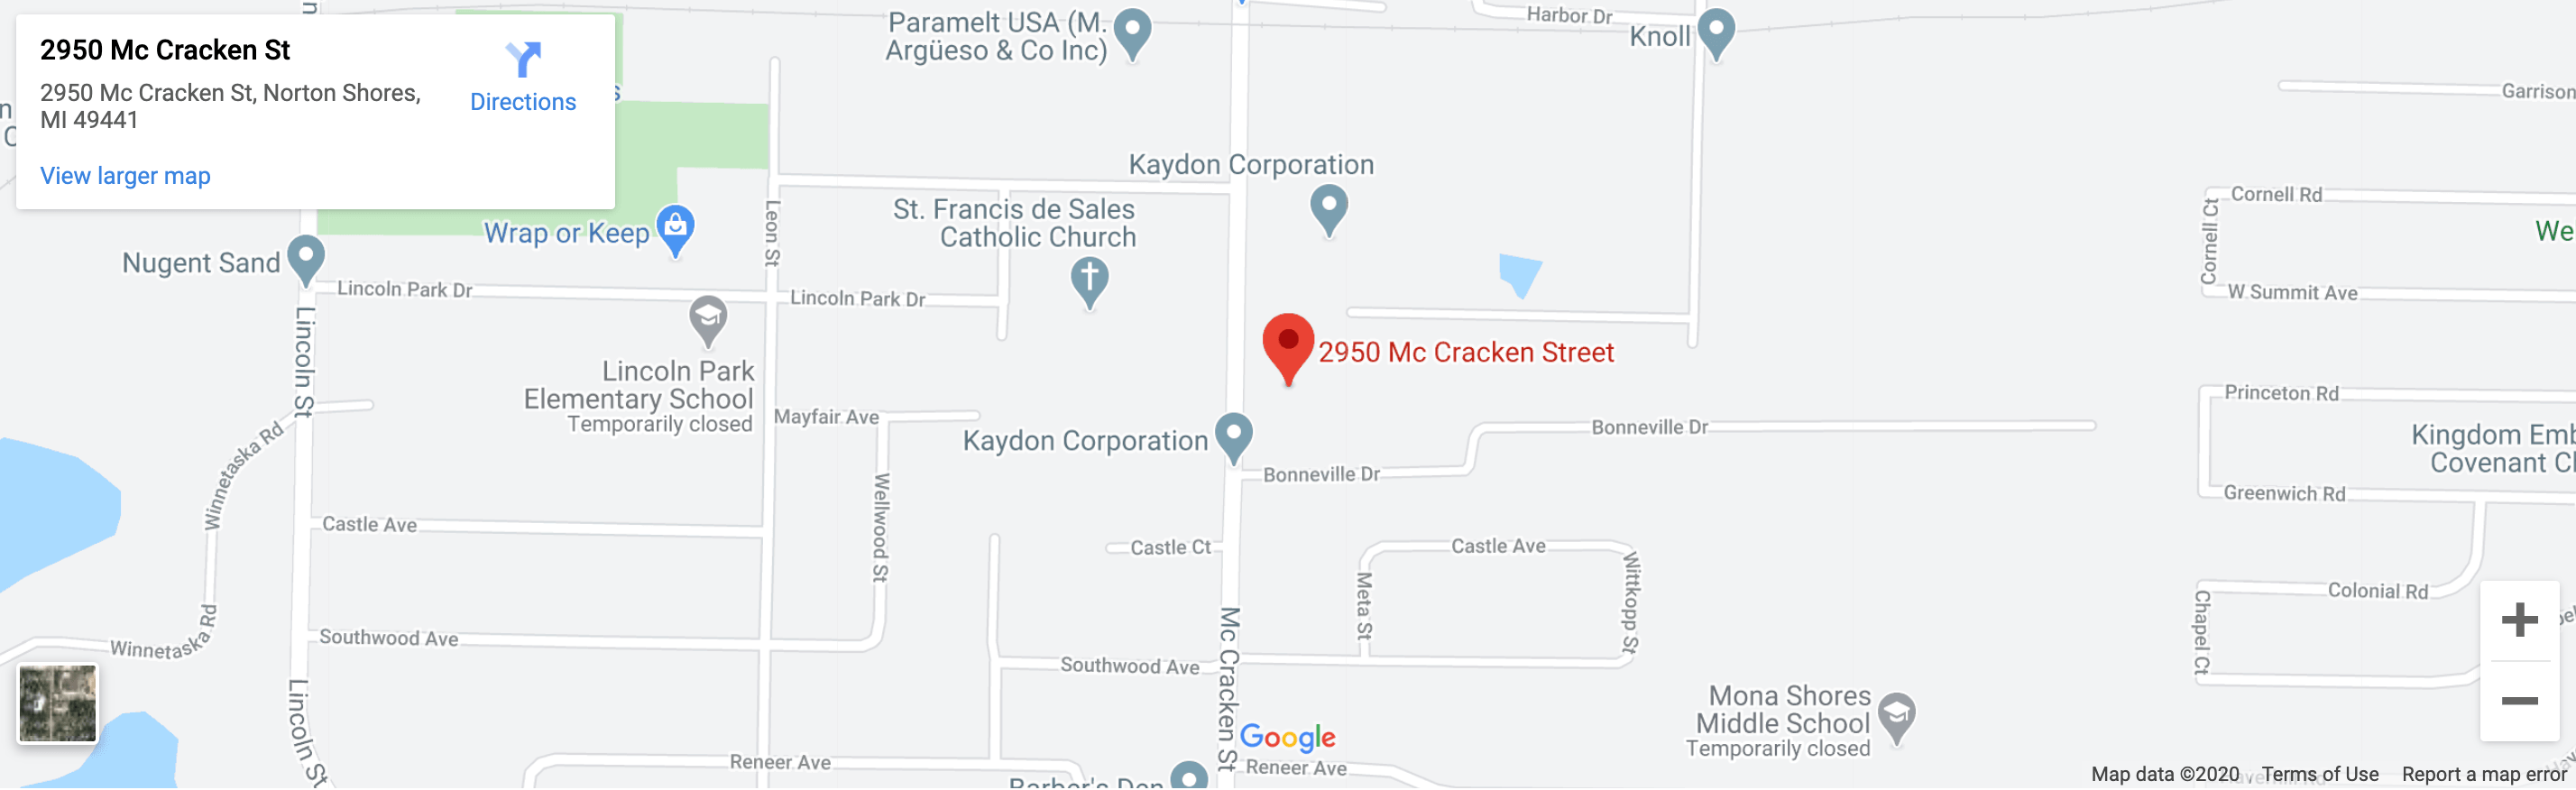 Muskegon Montessori Academy for Environmental Change is located at 2950 McCracken St. Norton Shores, MI 49441. This image will take you to google maps if clicked.